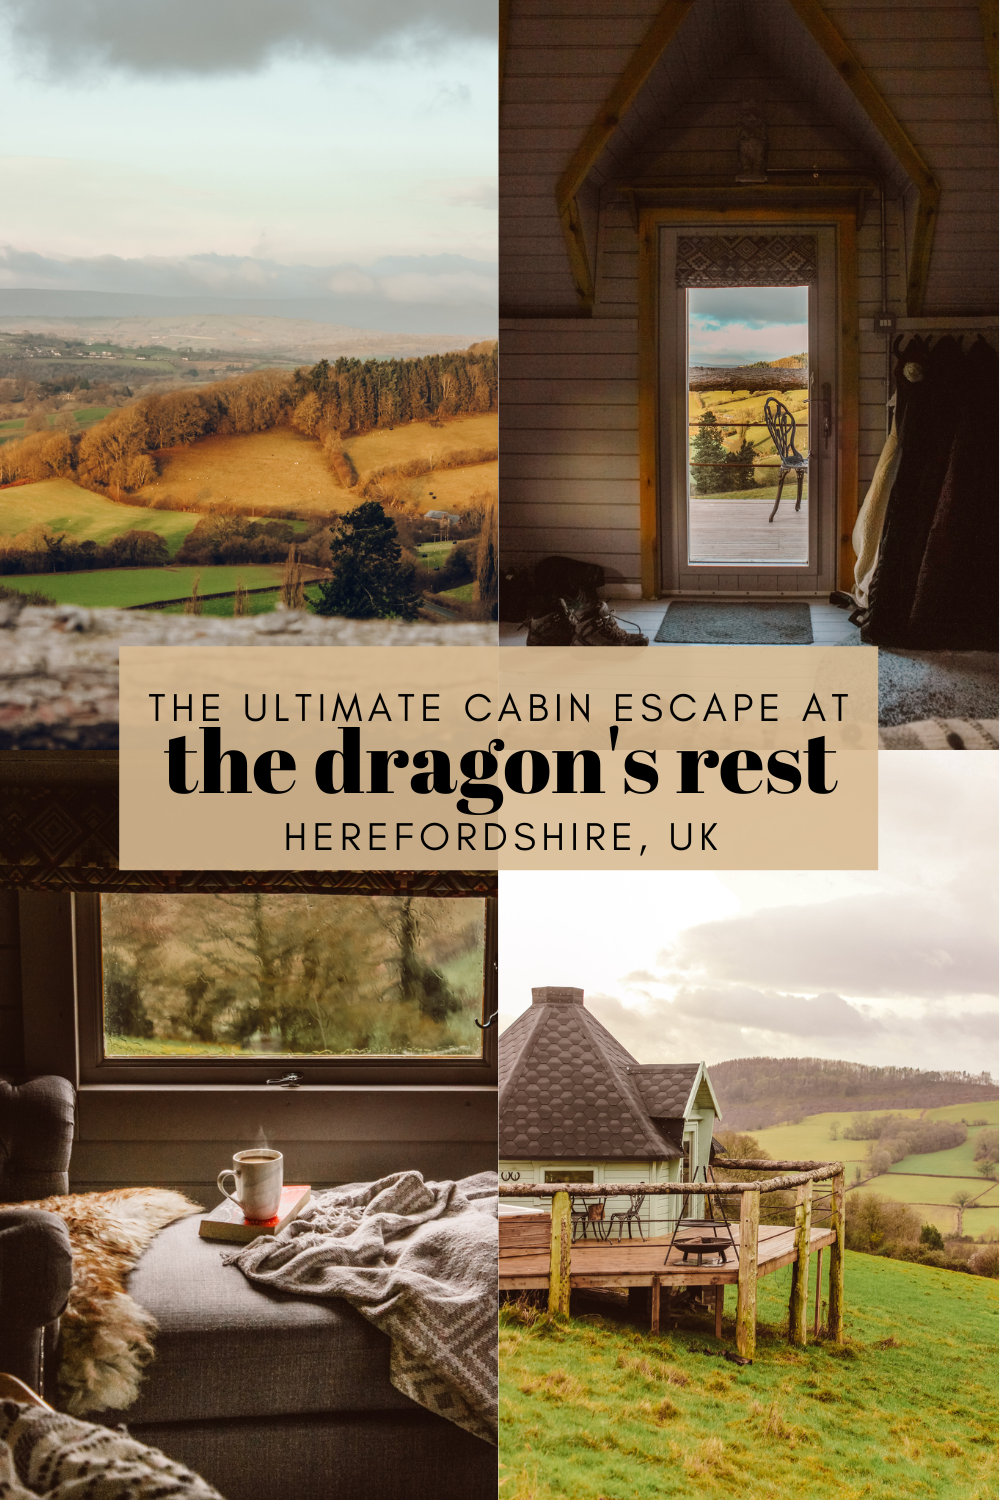 Glamping at The Dragon's Rest, Herefordshire